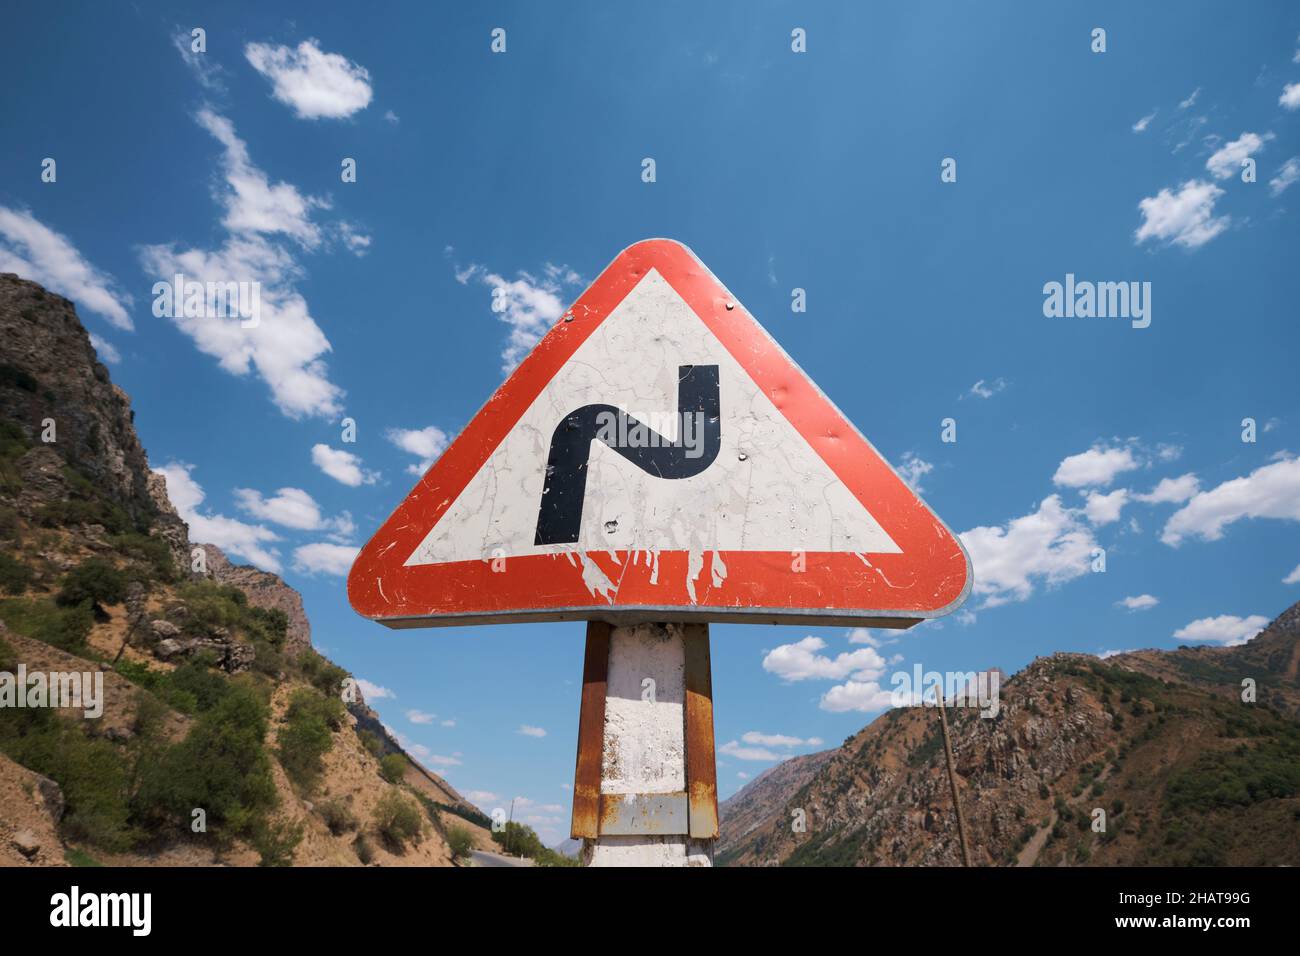 The standard triangle red and white road sign for a curvy section of a road. In the Lake Charvak resevoir area near Tashkent, Uzbekistan. Stock Photo